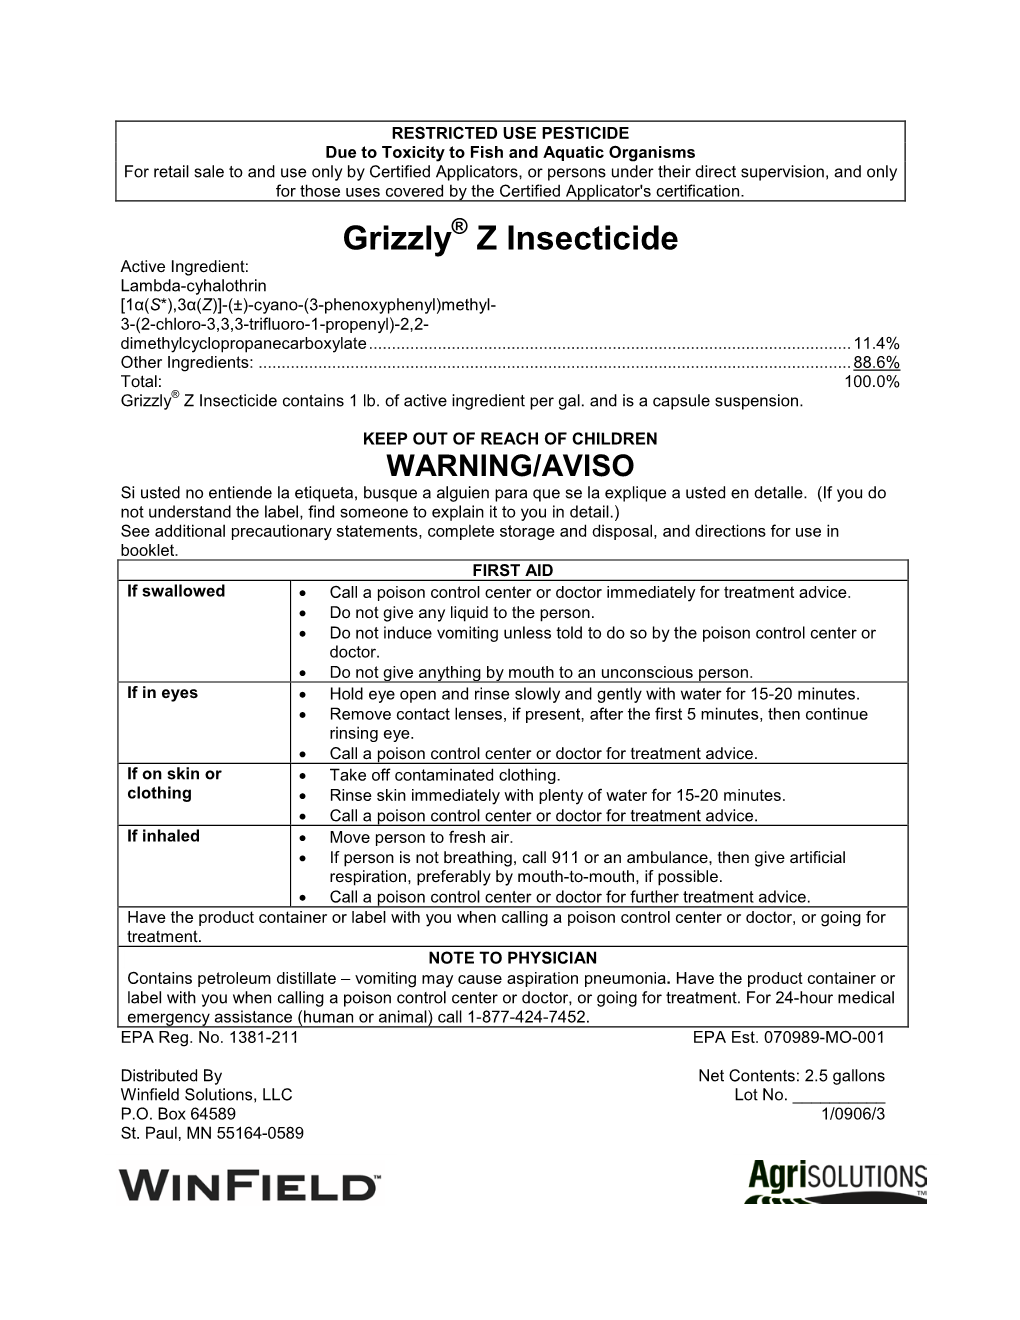 Grizzly Z Insecticide May Only Suppress Heavy Infestations And/Or Migrations